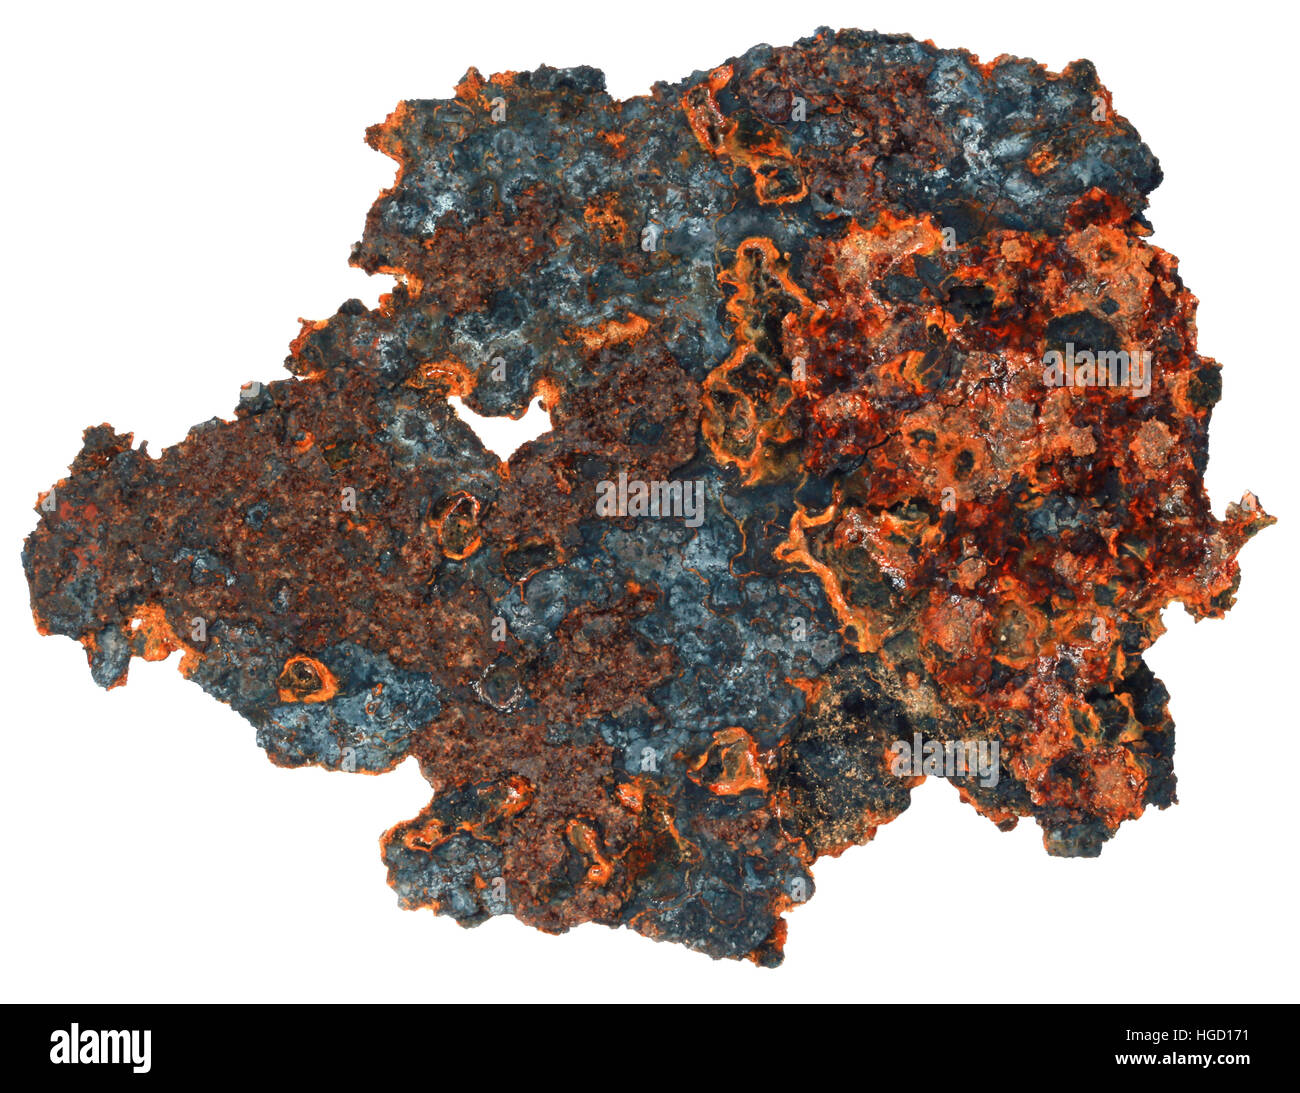 Rusty metal sheet over white background Stock Photo